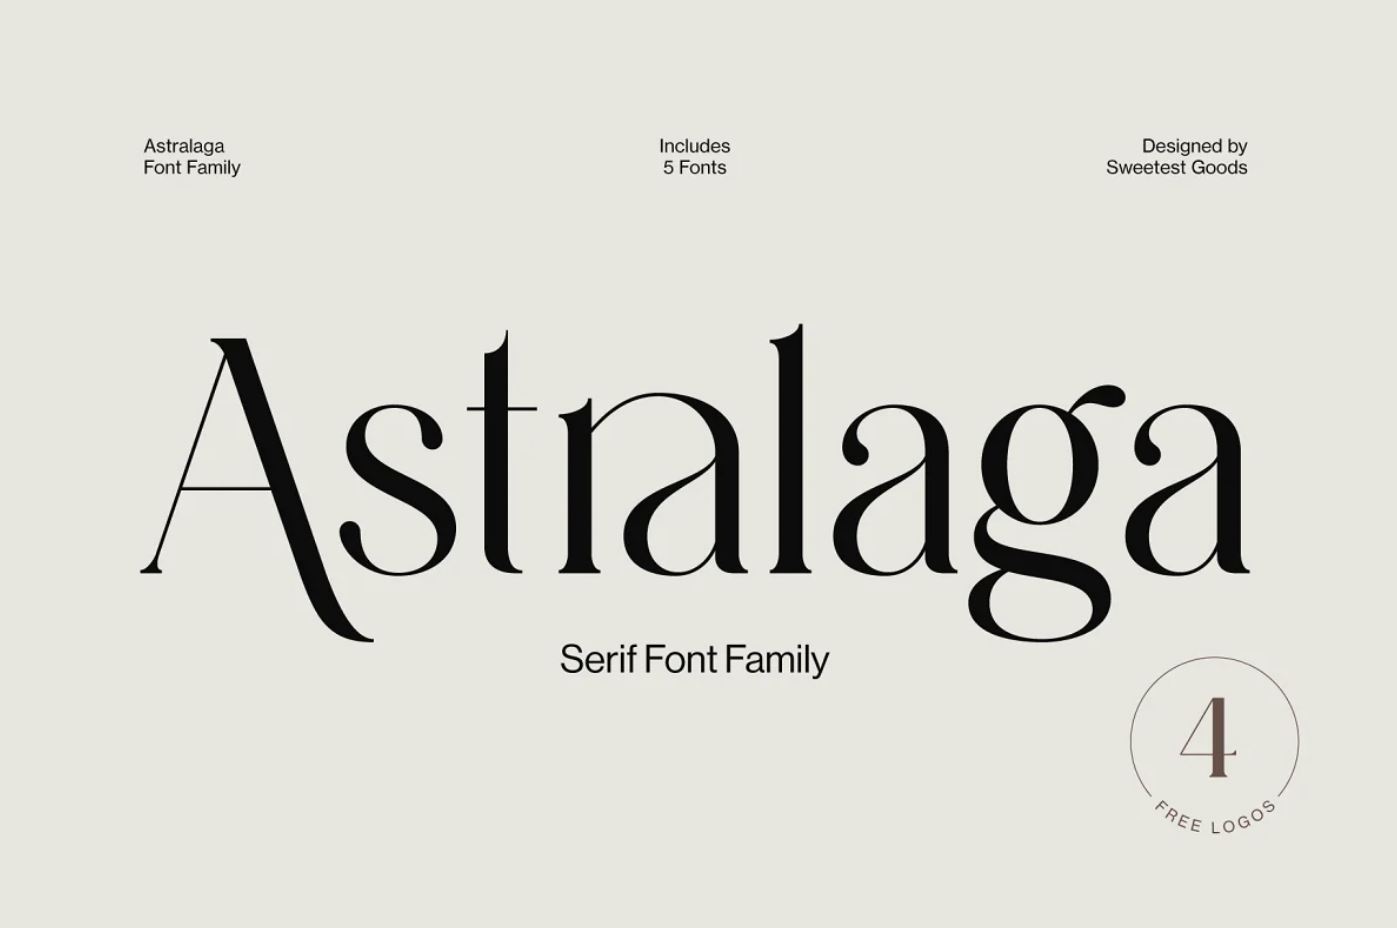 High Contrast Display and Luxury Typeface